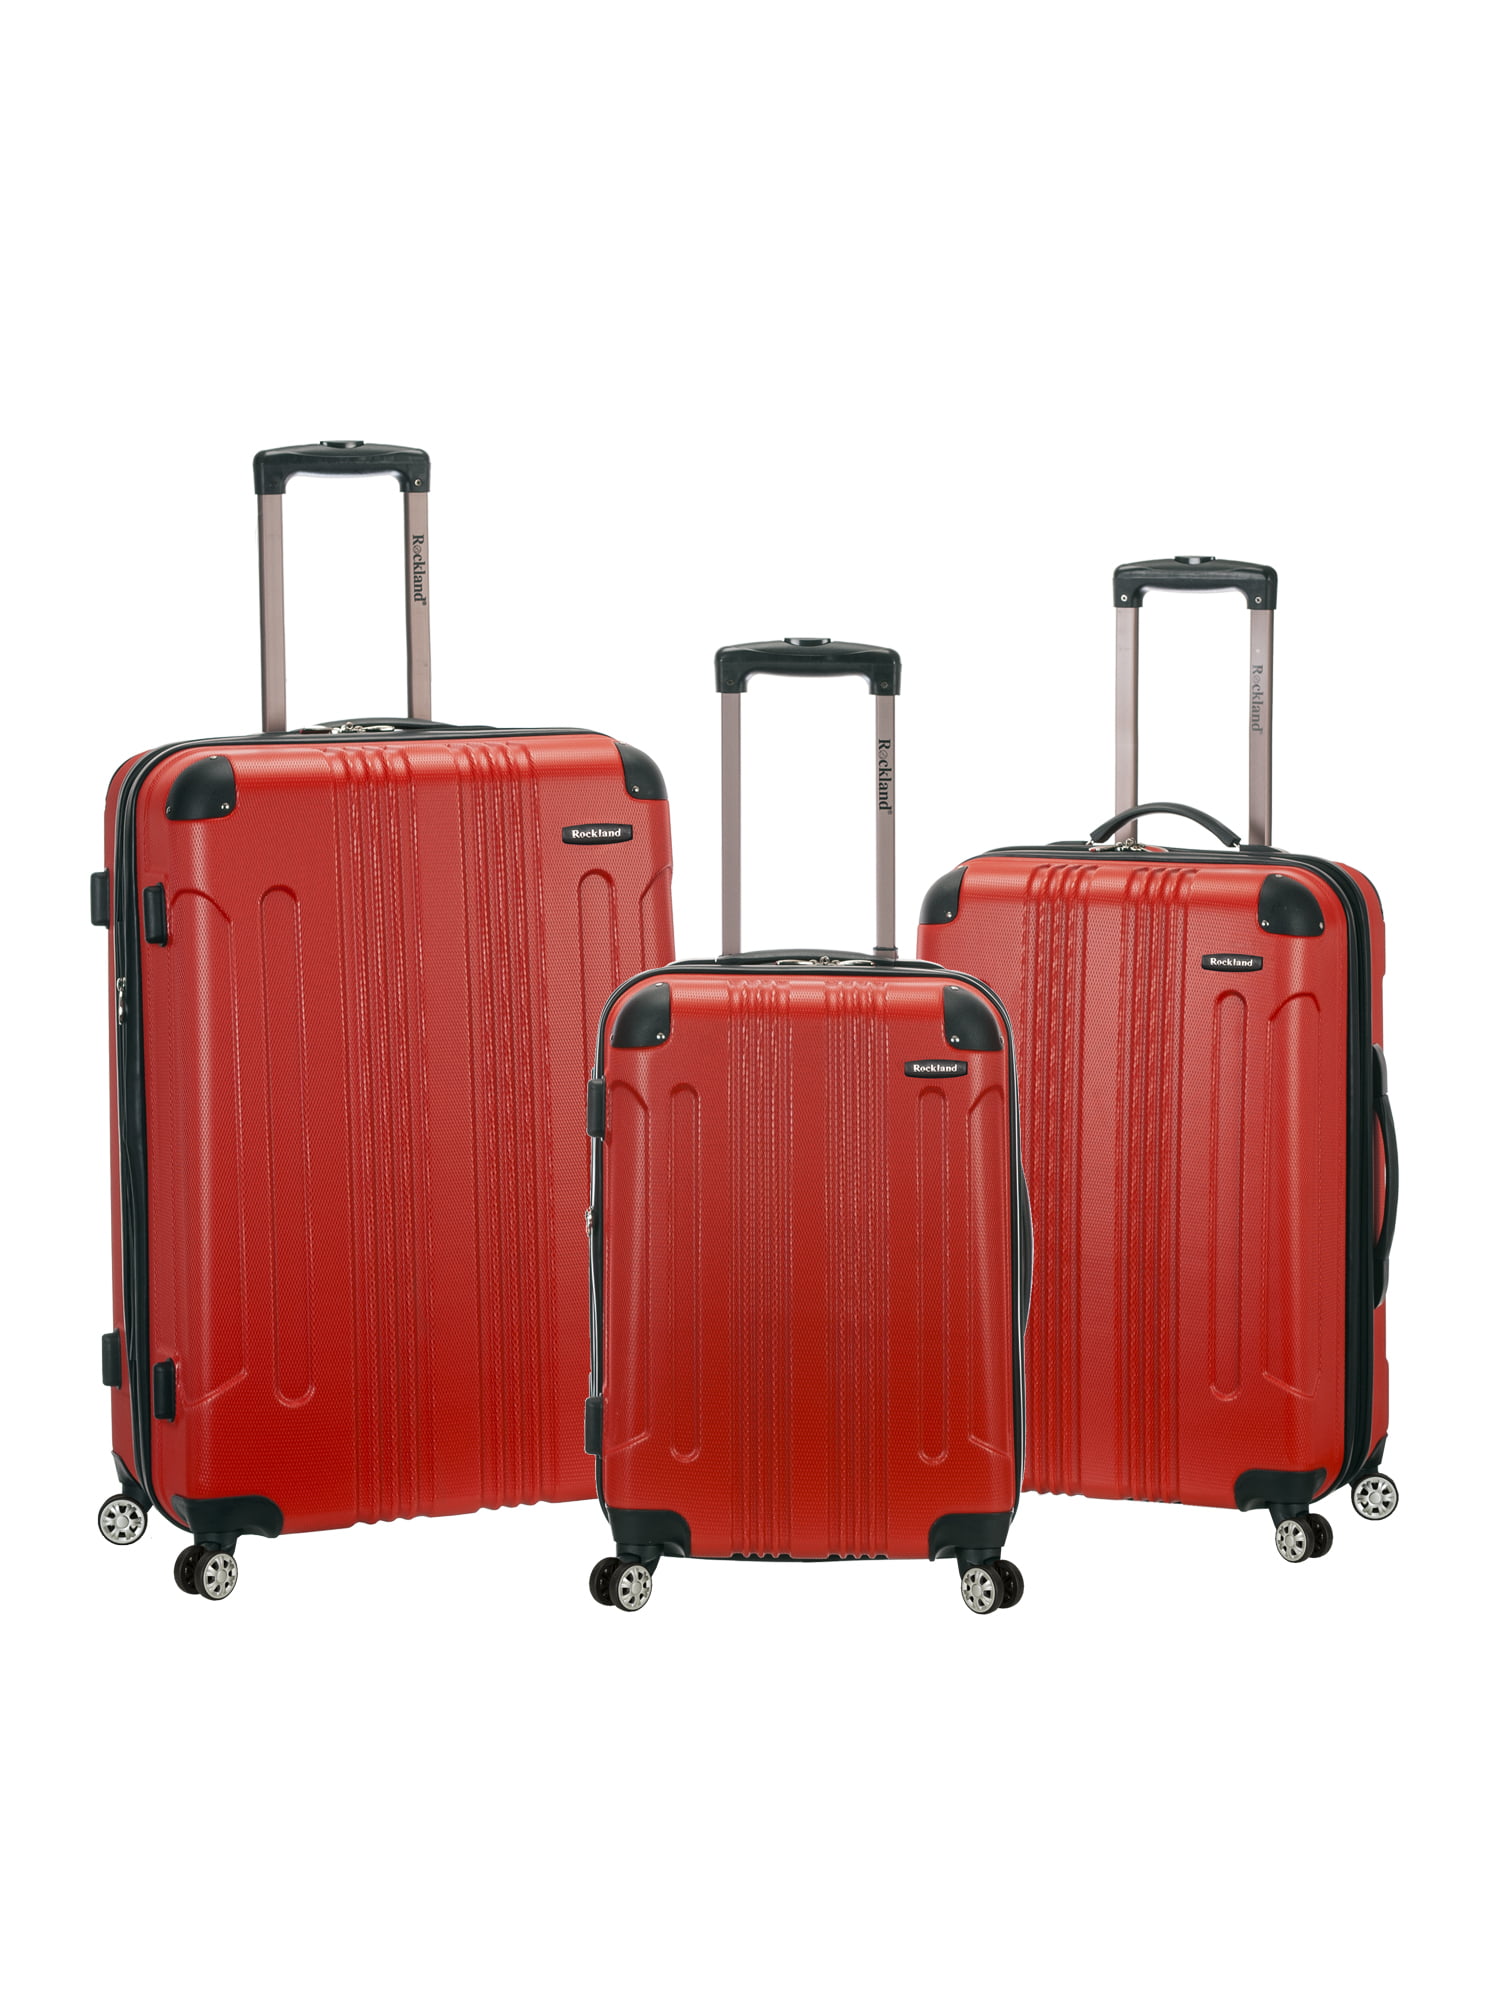 Rockland 3pc ABS Hardside Carry On Luggage Set - Red